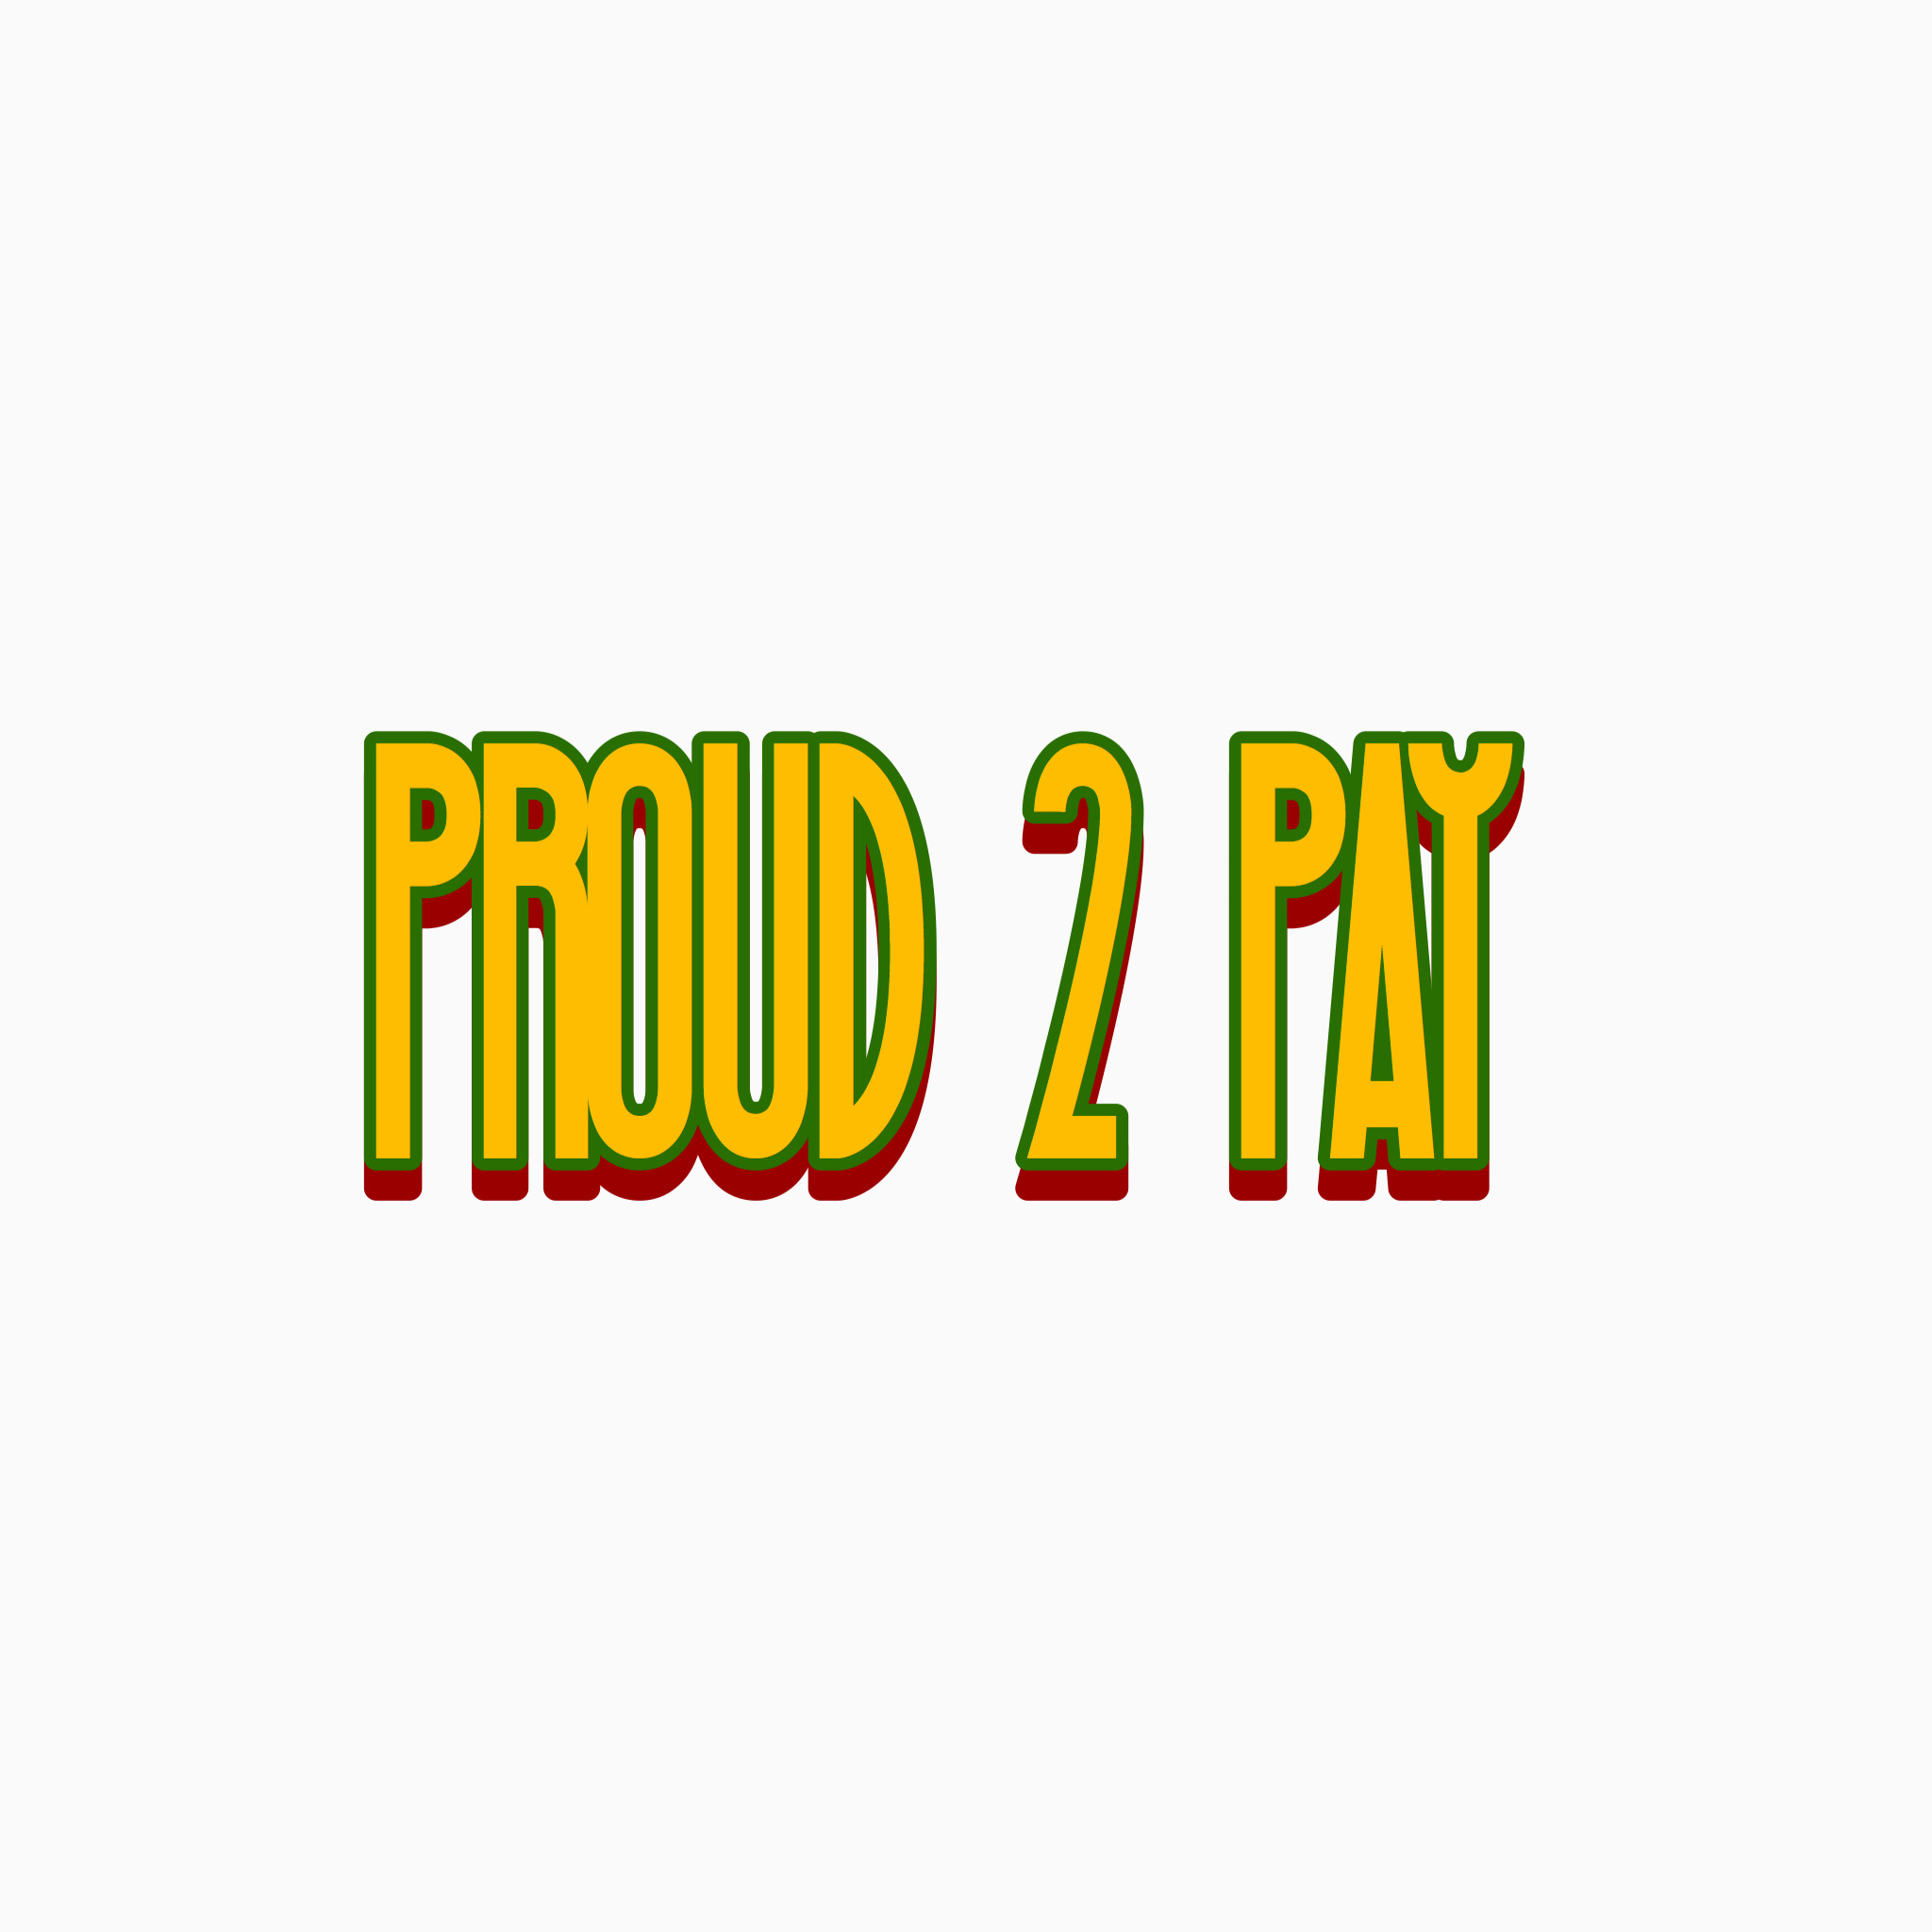 Proud 2 Pay.png